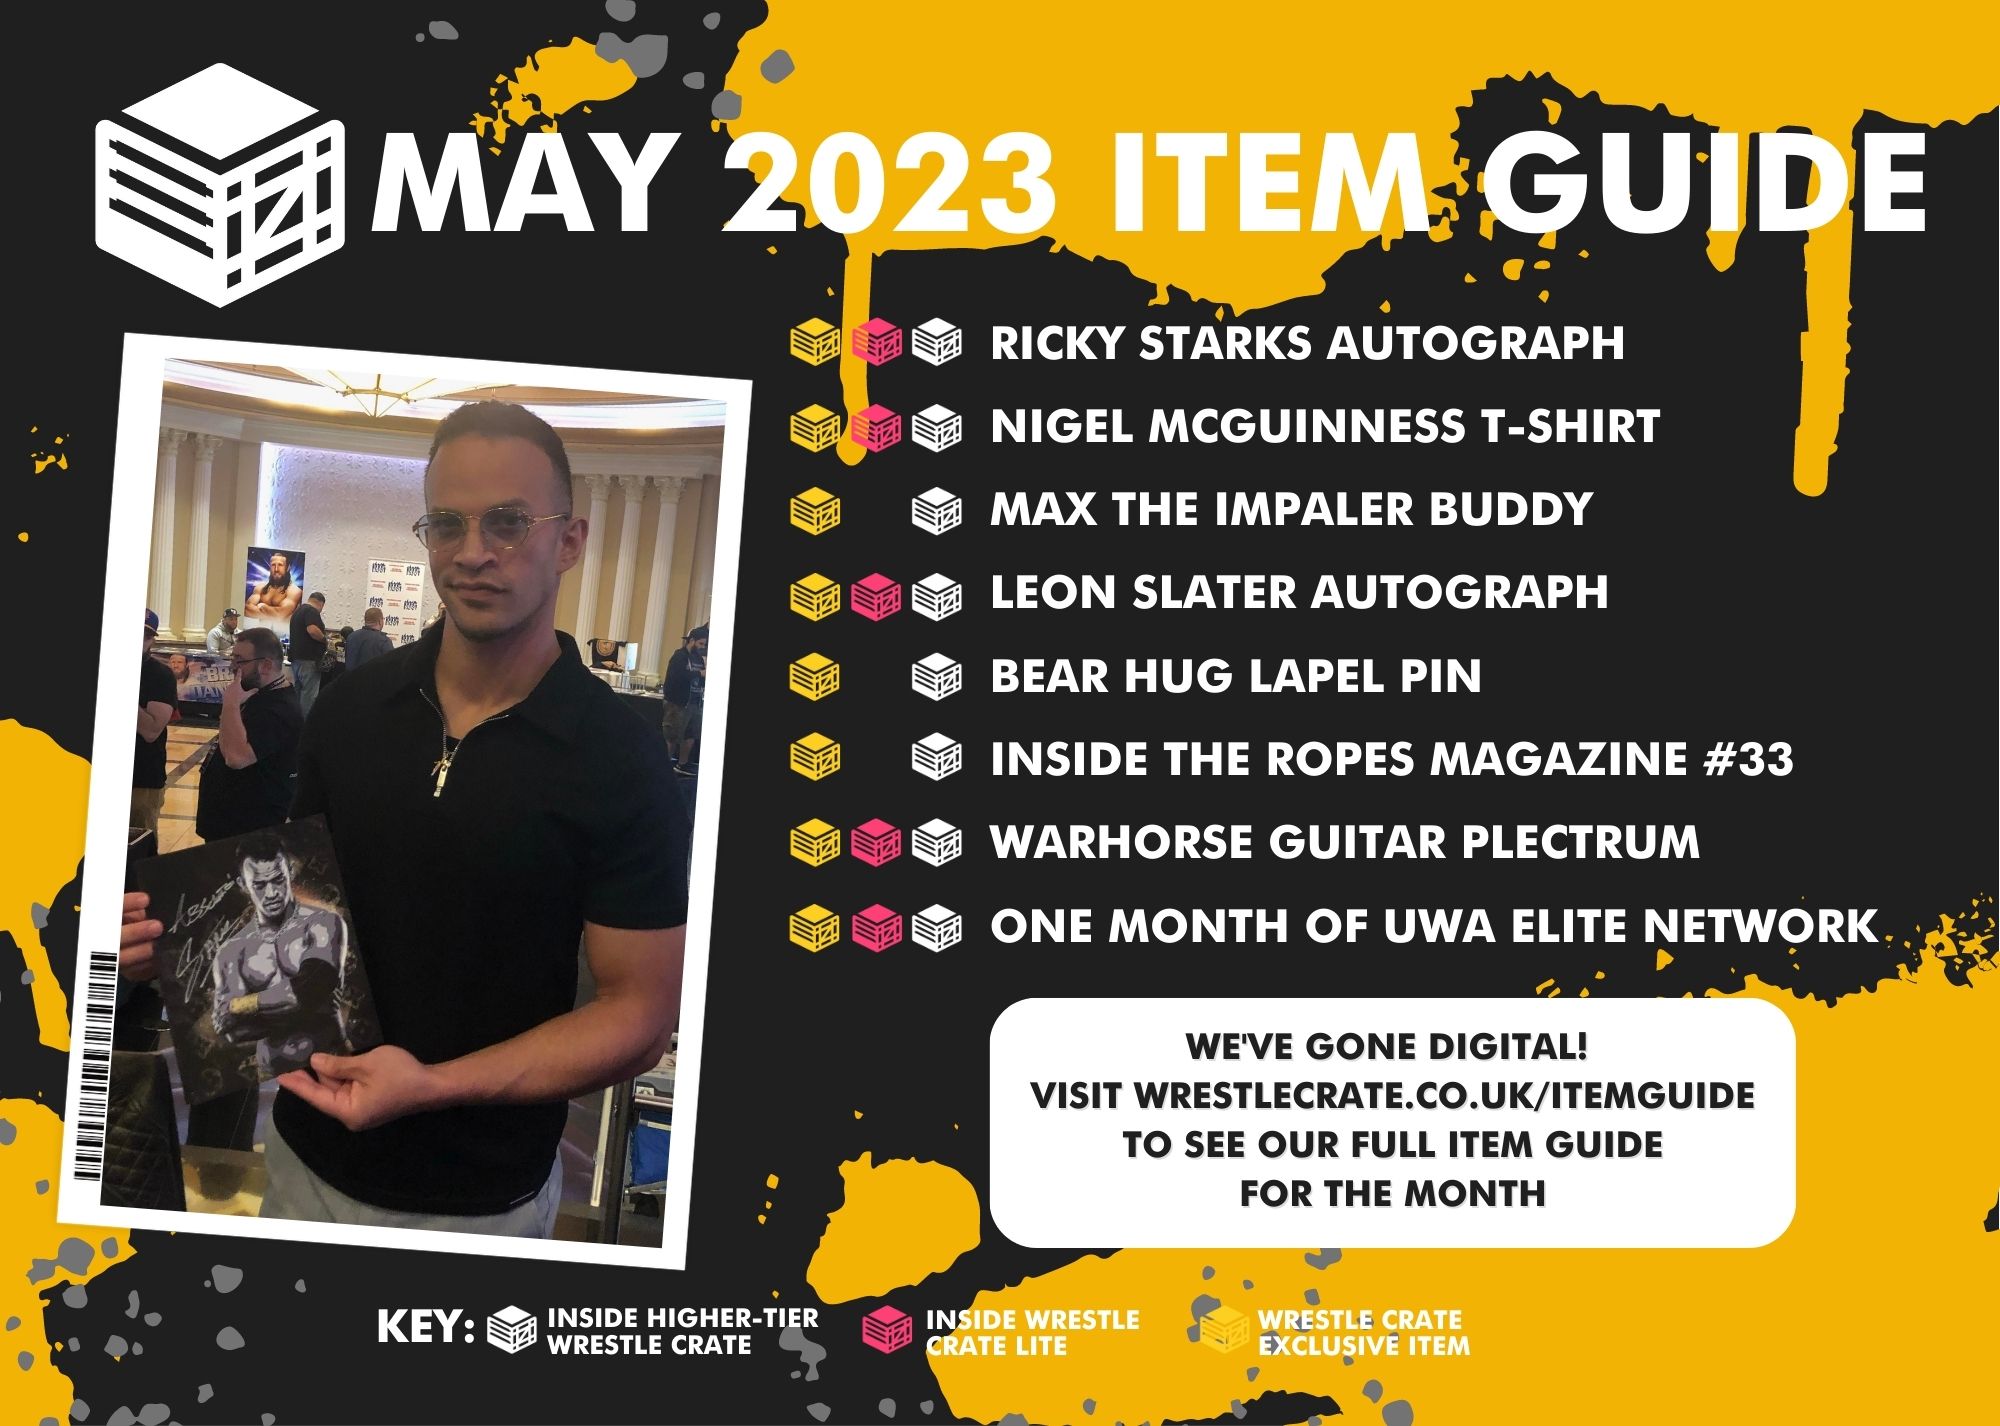 355-wrestle-crate-items-may-2023-17189680234136.jpg